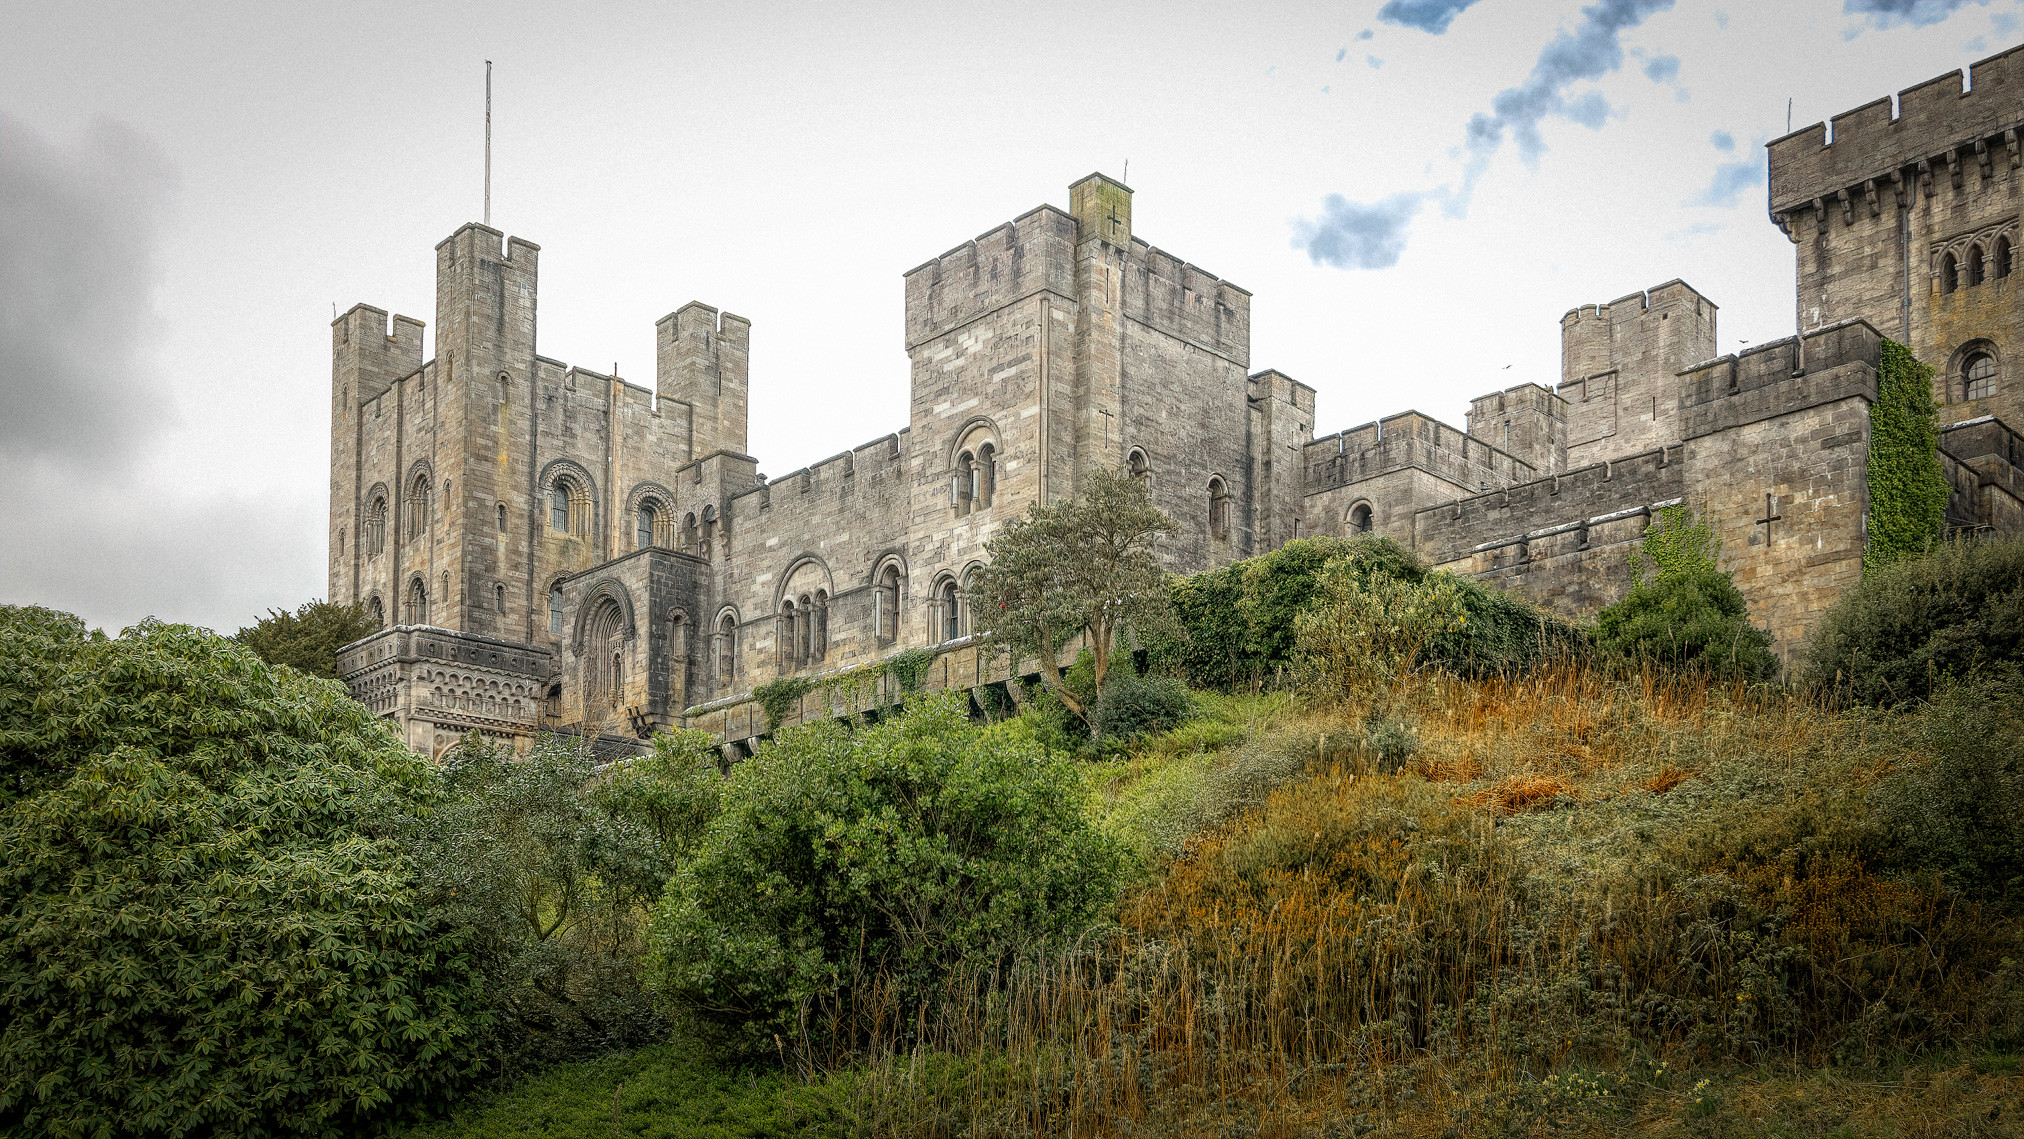 Climate change is already having an impact on the landscape and heritage of Wales, writes Jonathan Hughes of National Trust Cymru. The picture shows Penrhyn Castle, Llandygai, Bangor, Gwynedd, North Wales against a grey sky.